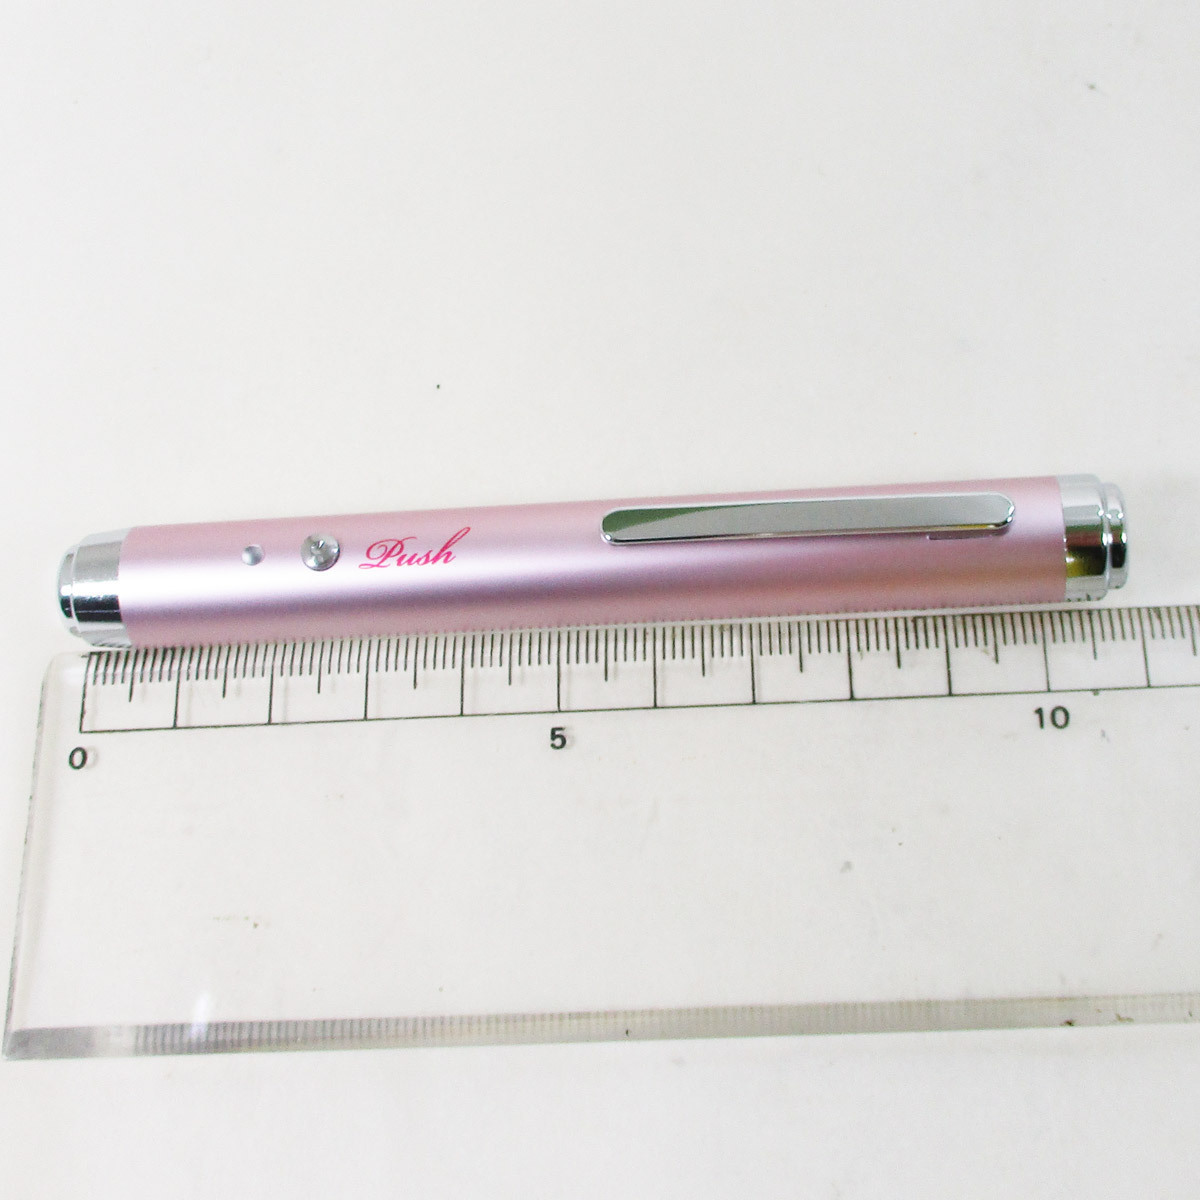  including in a package possibility pen type laser pointer TLP-3200L pink PSC Mark made in Japan 